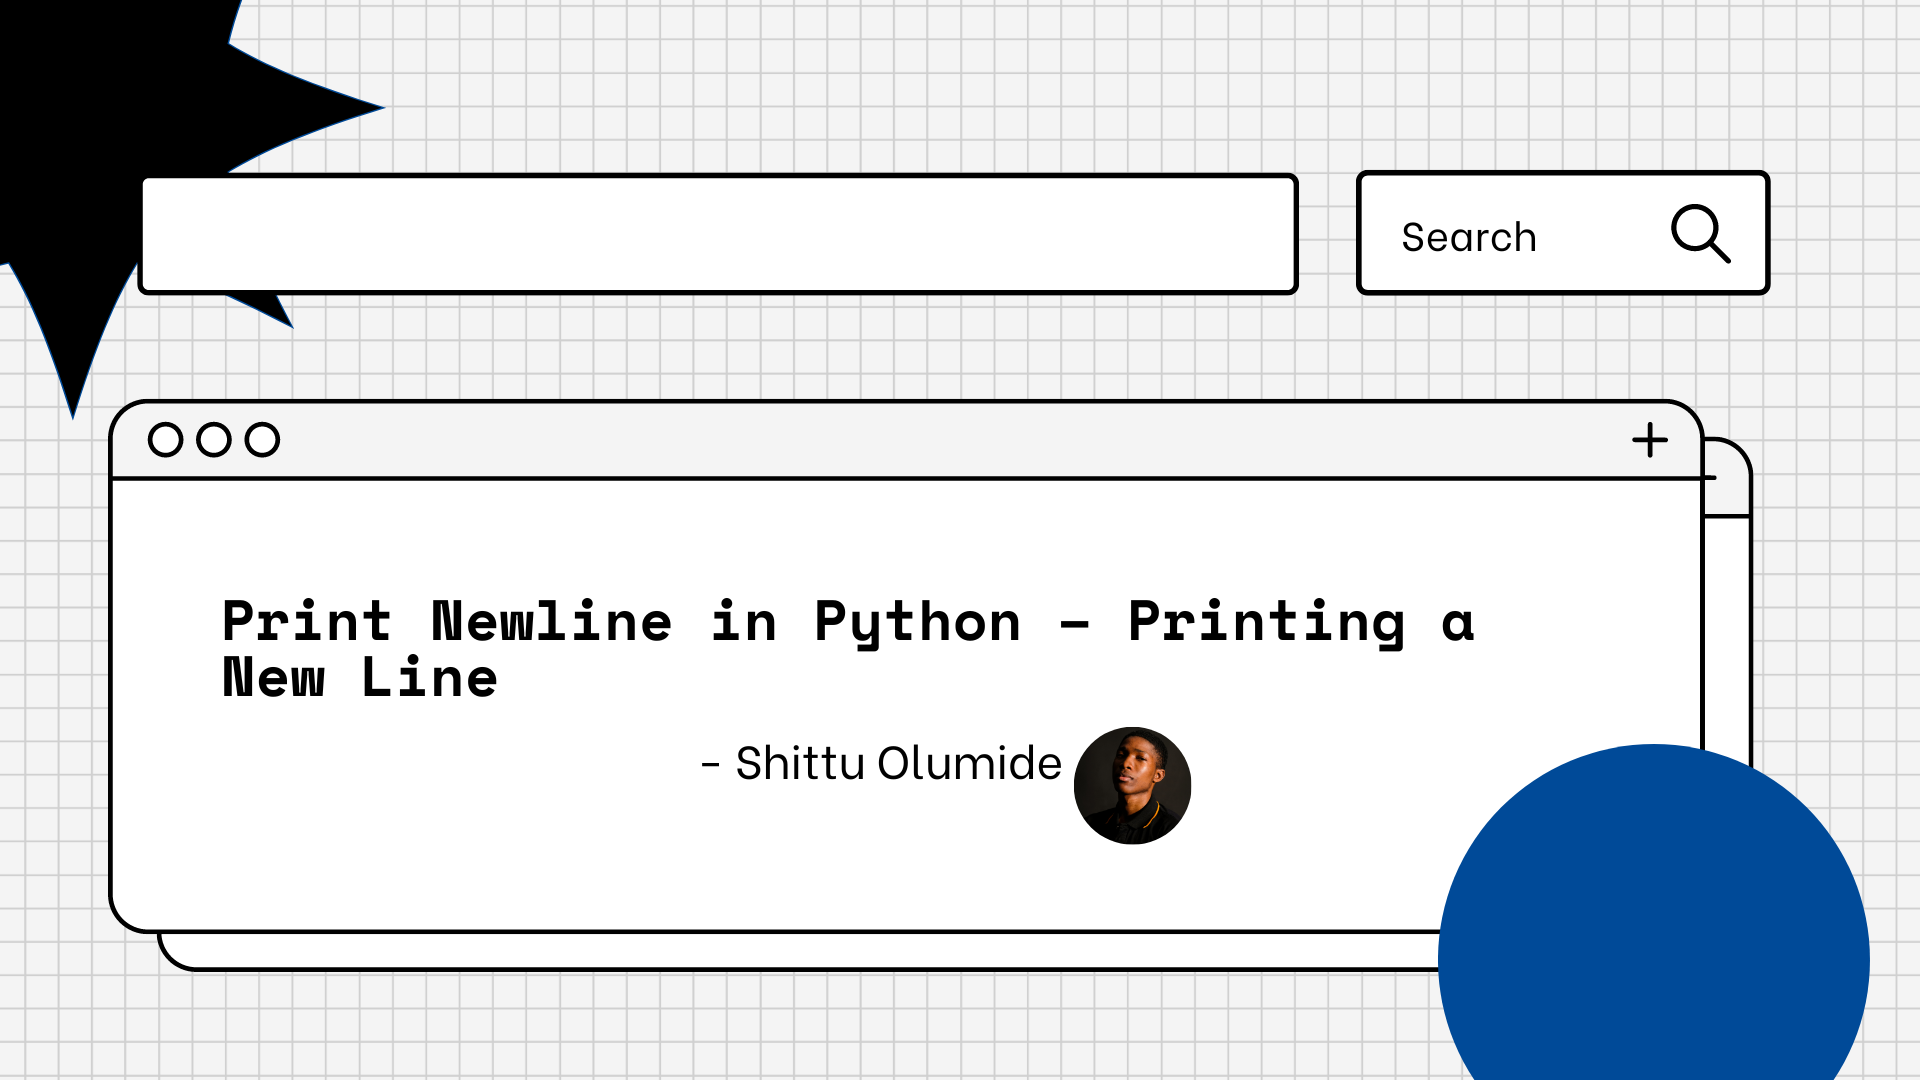 https://www.freecodecamp.org/news/content/images/2023/03/Shittu-Olumide-Print-Newline-in-Python---Printing-a-New-Line-1.png